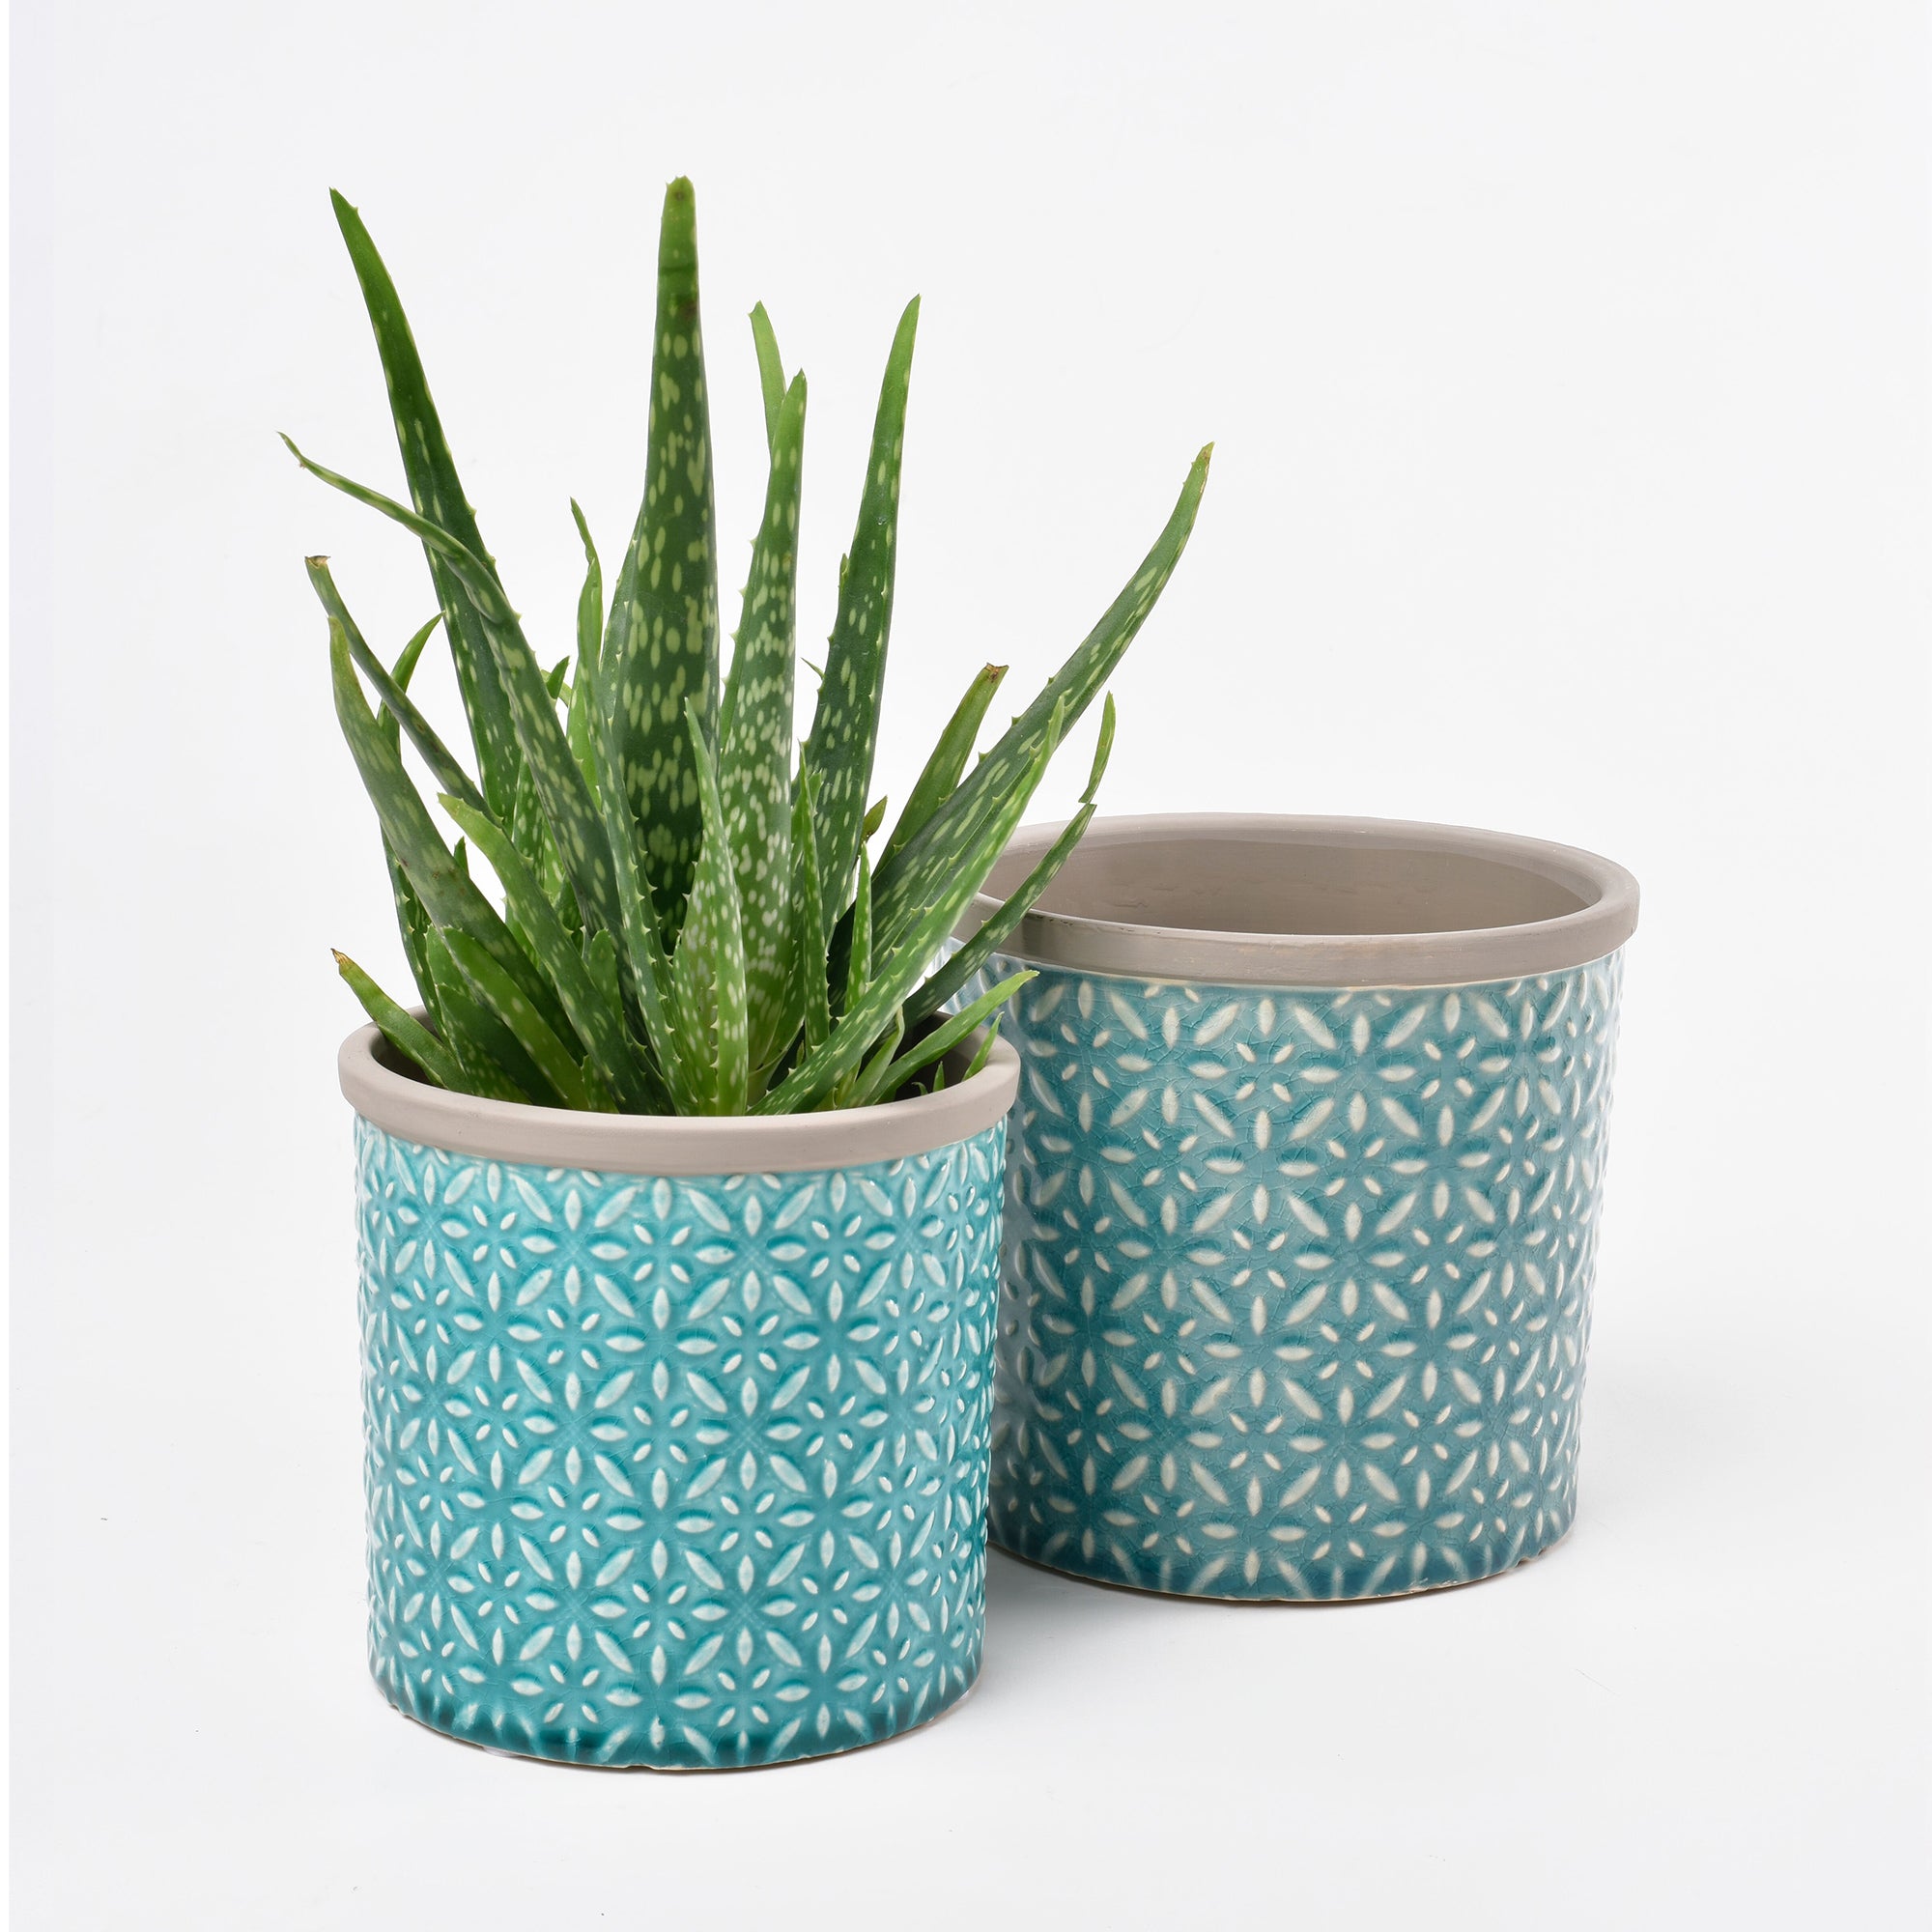 Tuscany -inspired Indoor Plant Pot